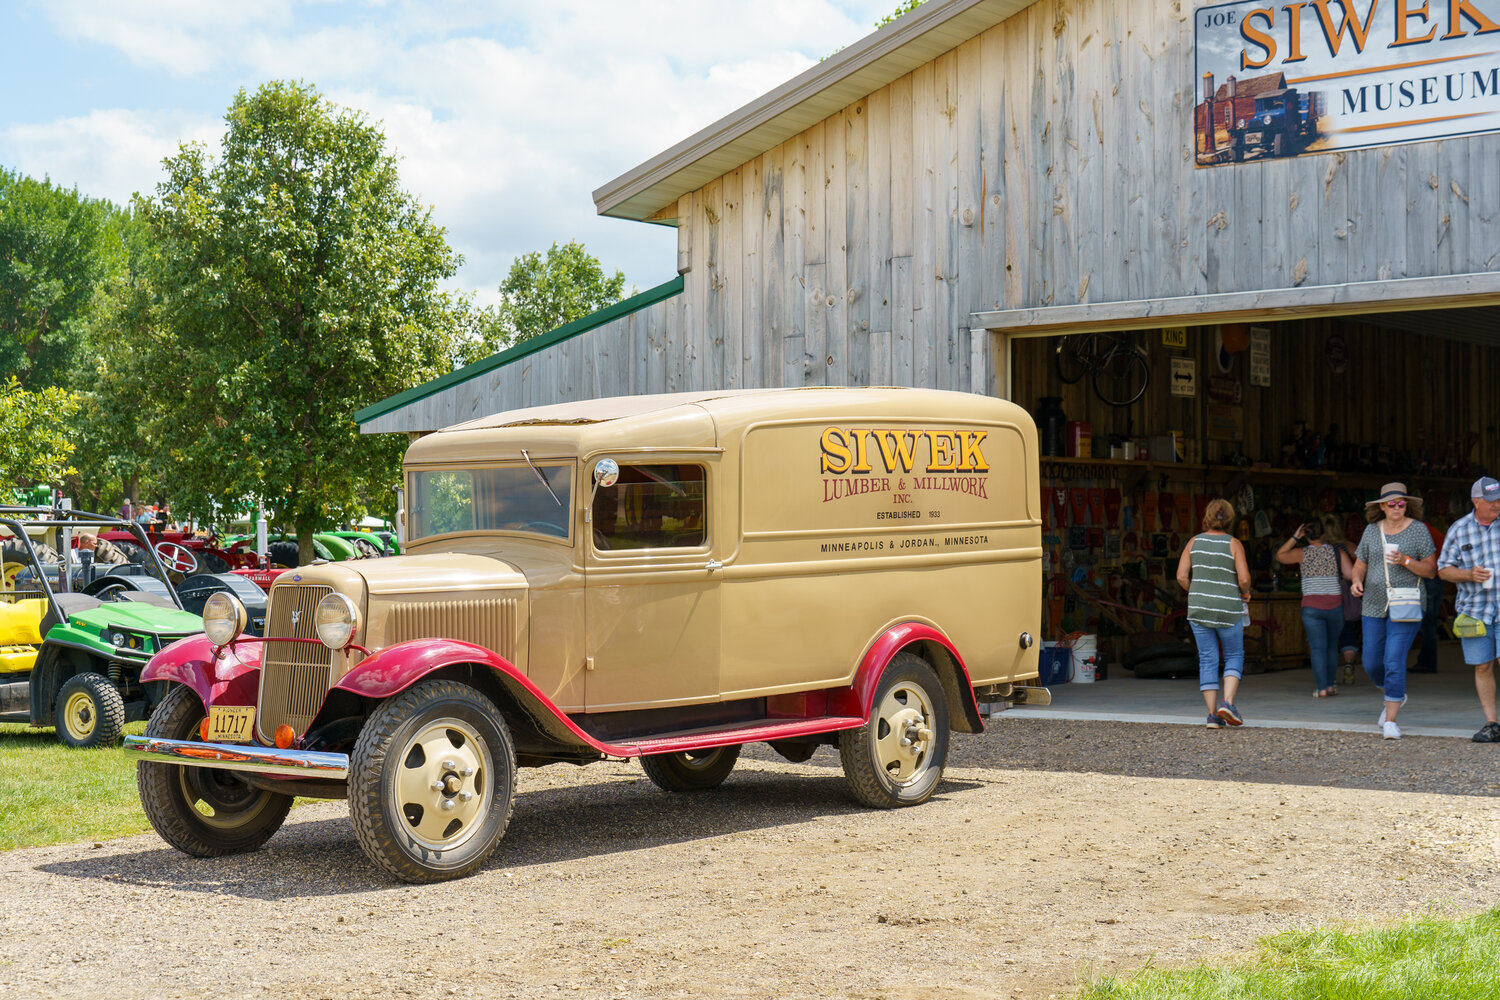 Siwek Lumber and Millwork out of Minneapolis and Jordan MN now has a permanent museum on the Little Log House property. Inside was filled with memorabilia and tools used in the Siwek mills.